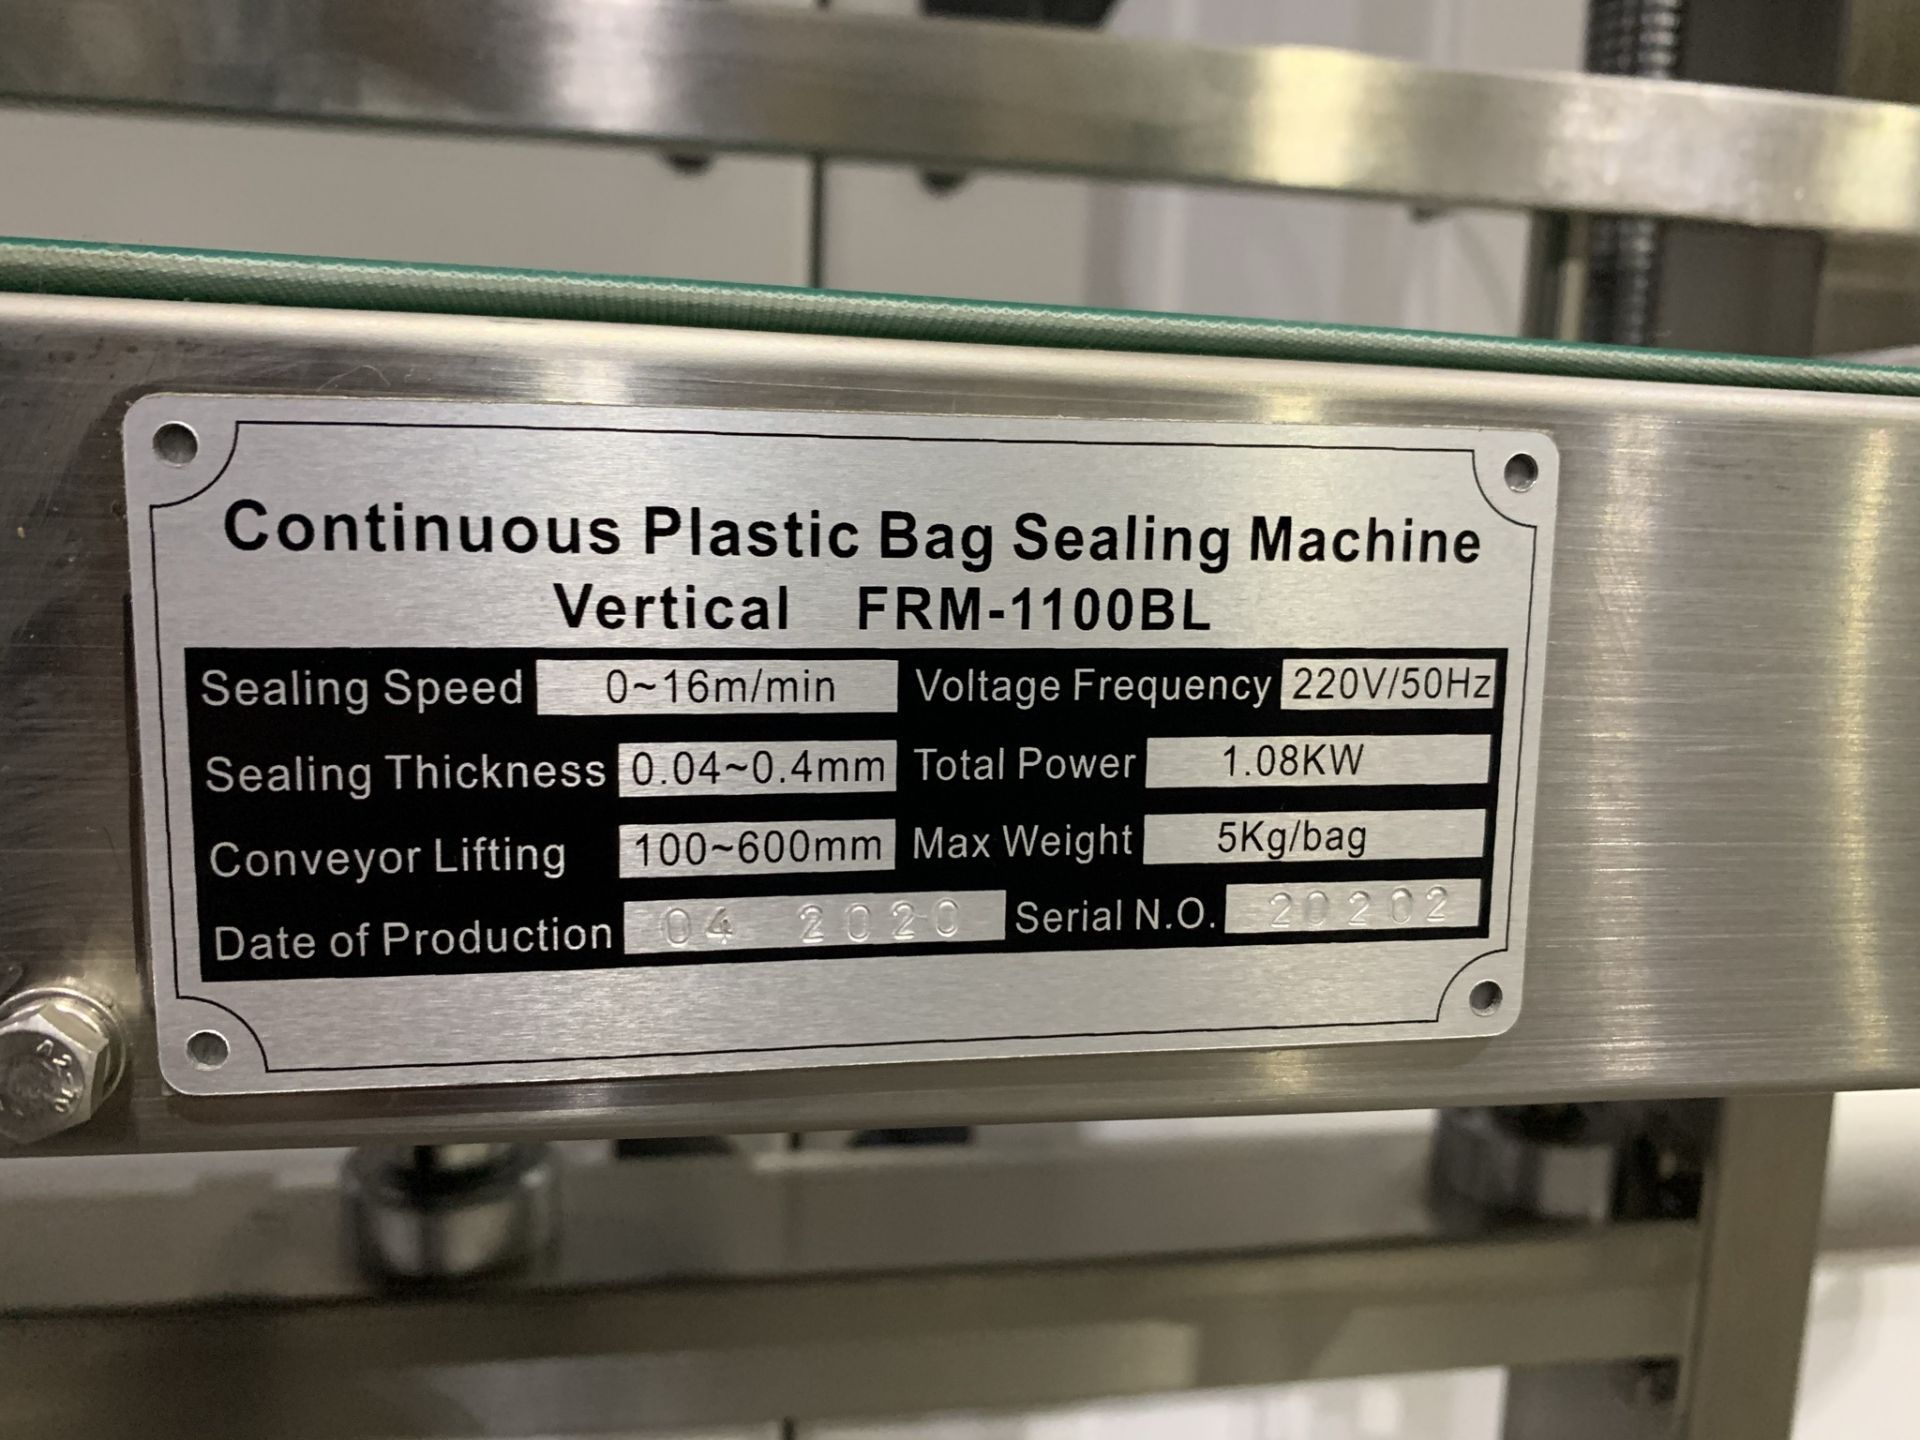 FRM-1100BL Plastic Bag Sealing Machine, approx. 1. - Image 4 of 4